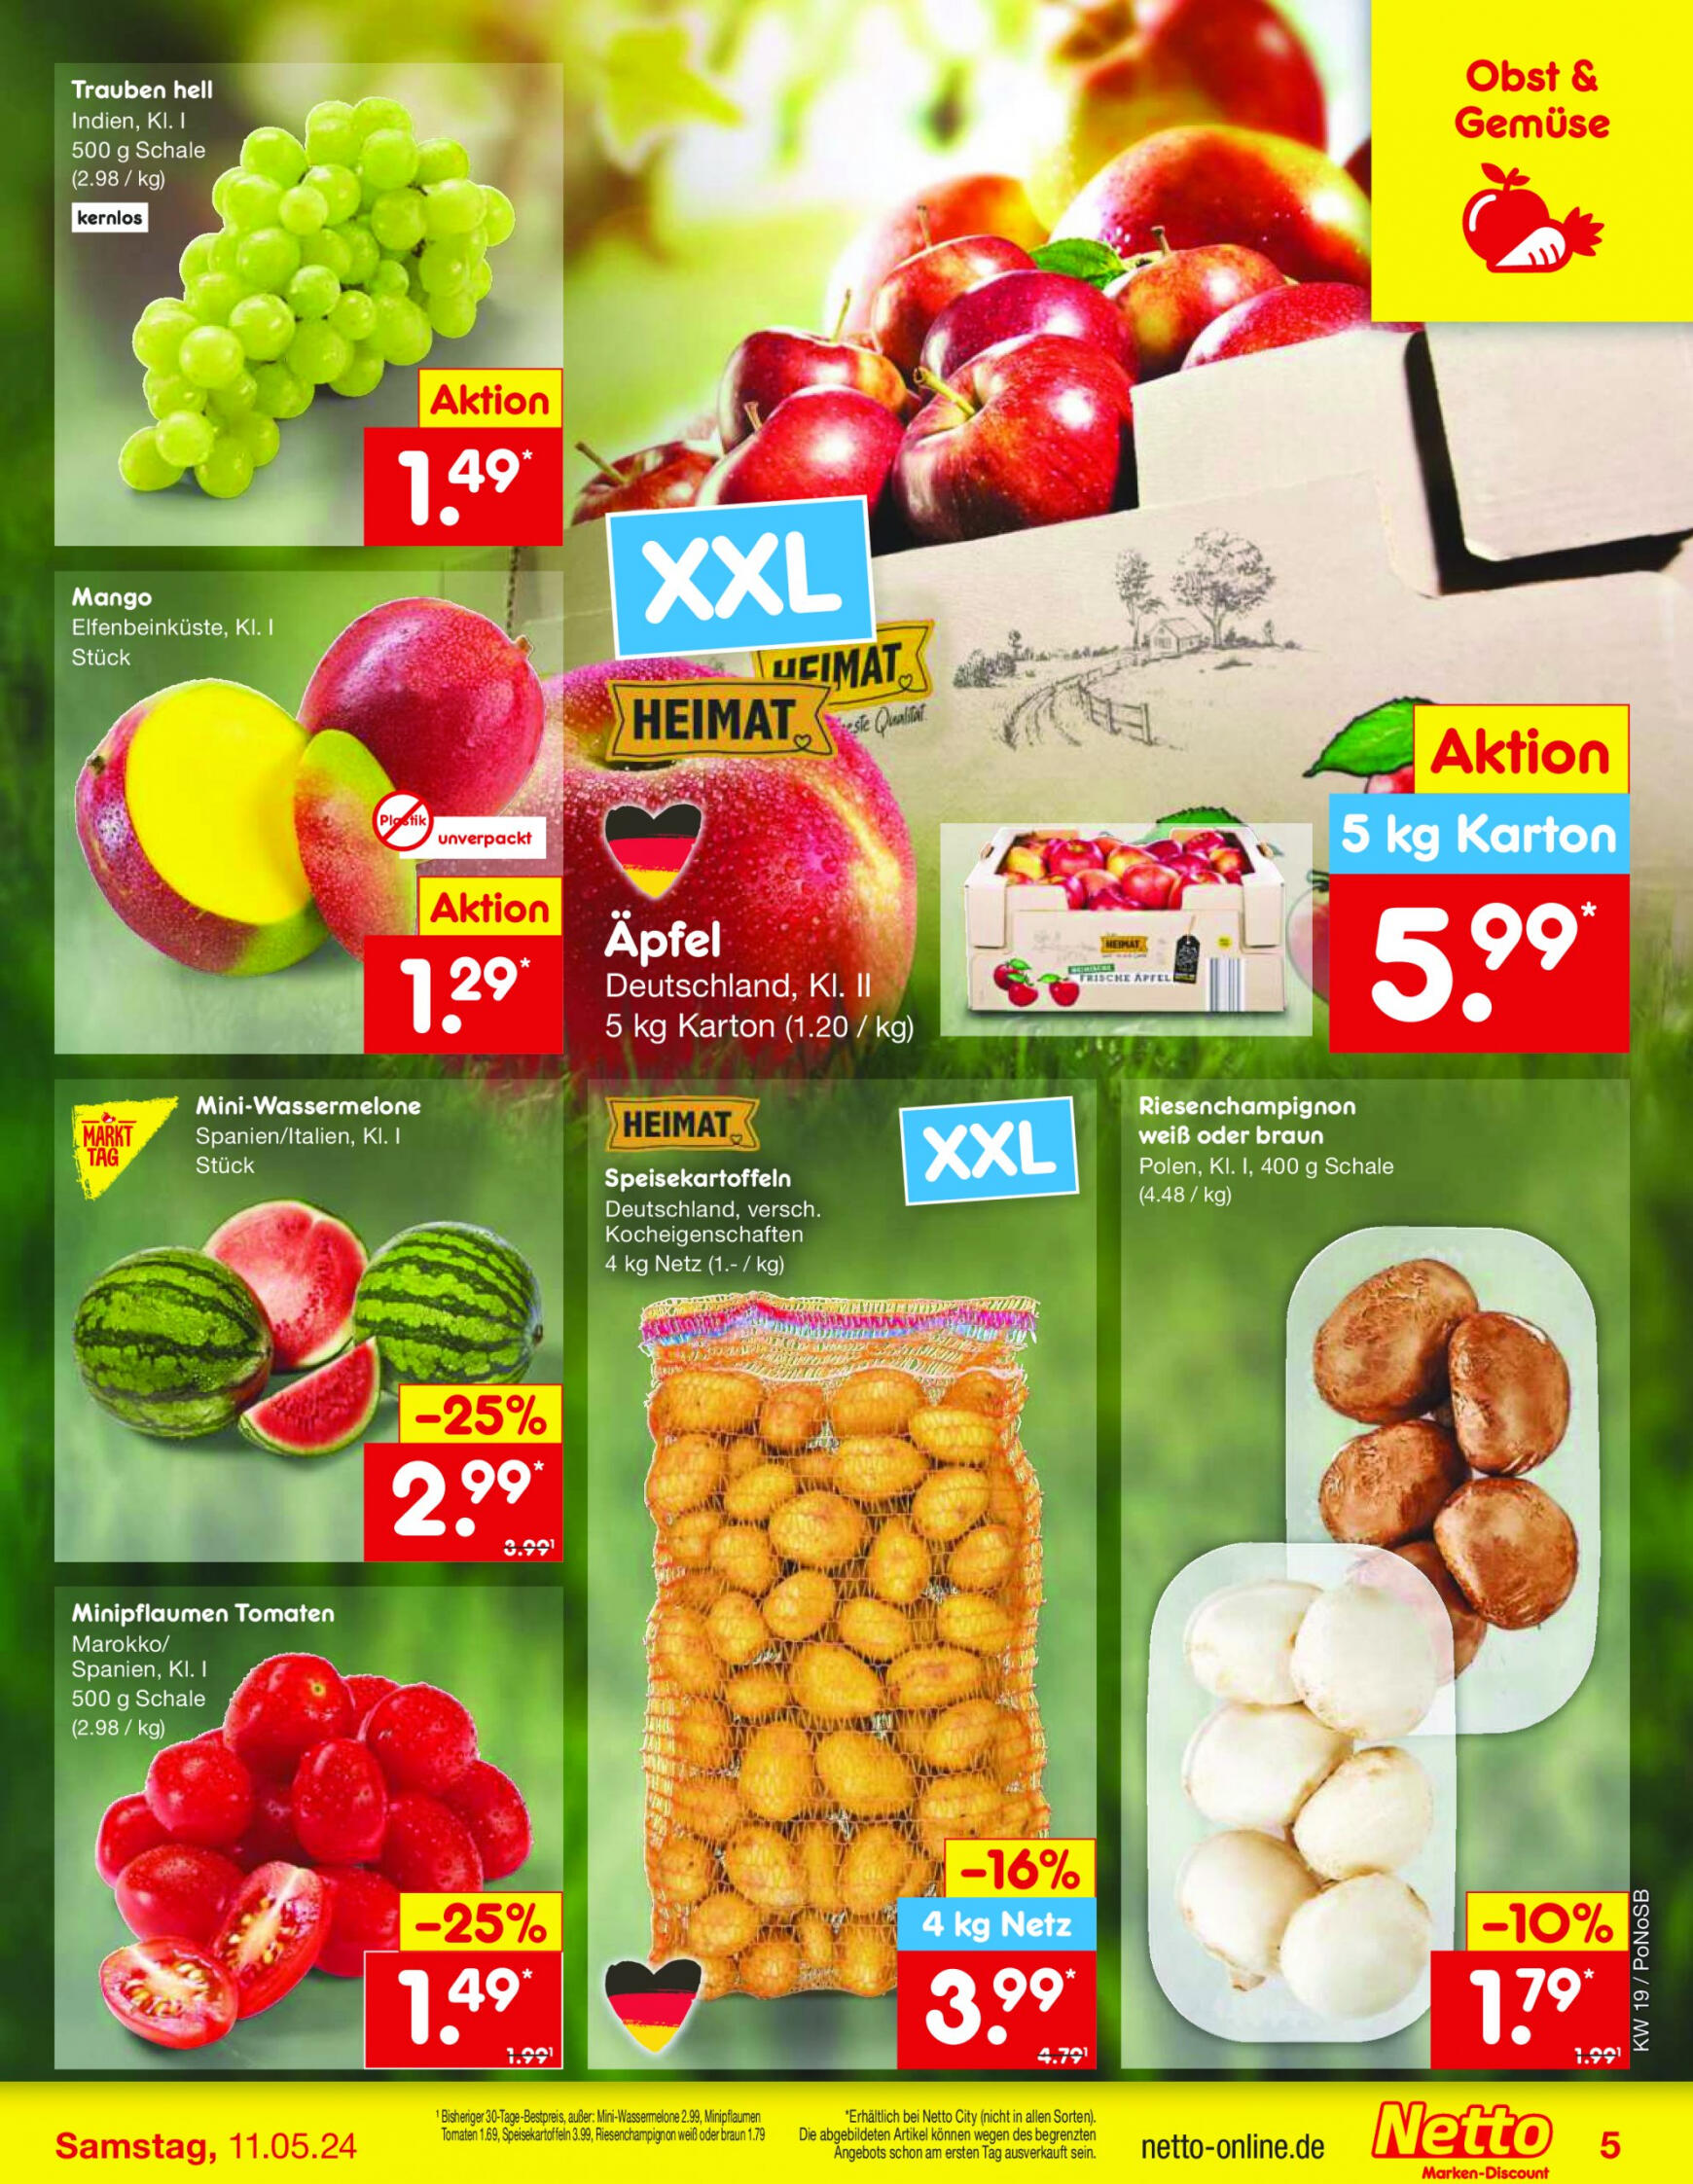 netto - Flyer Netto aktuell 06.05. - 11.05. - page: 5